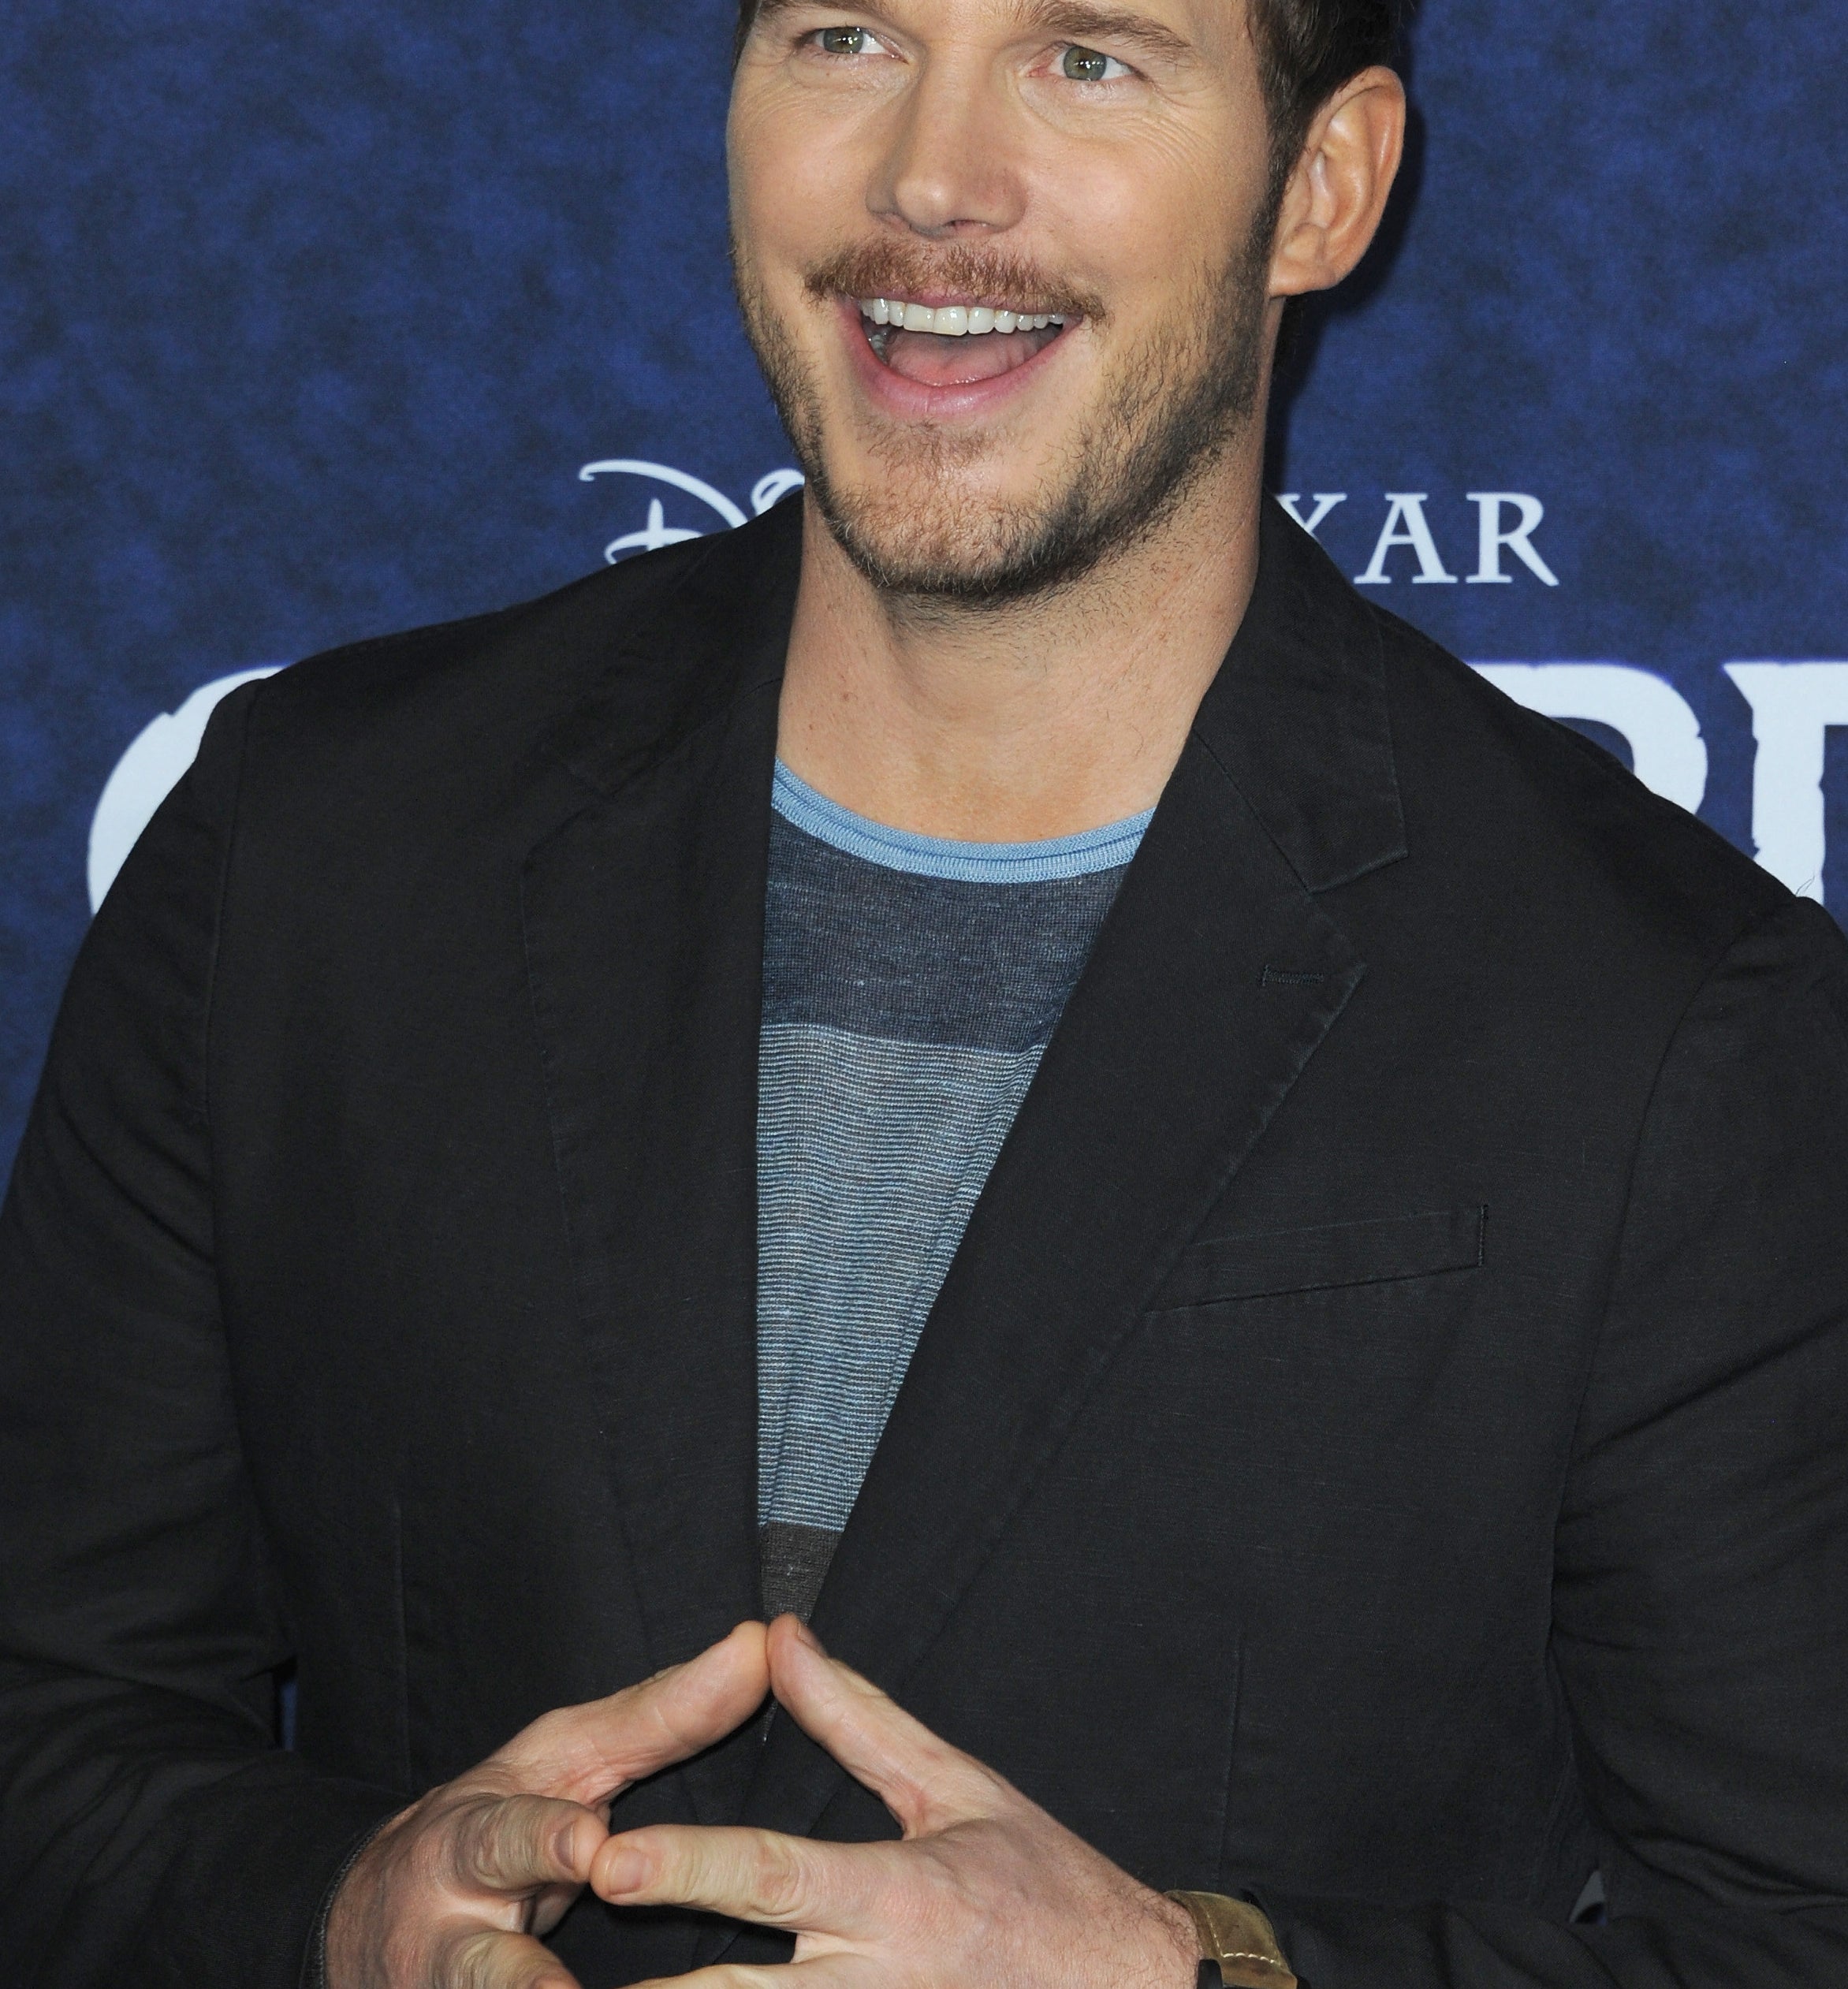 Chris Pratt laughing at an event in 2011